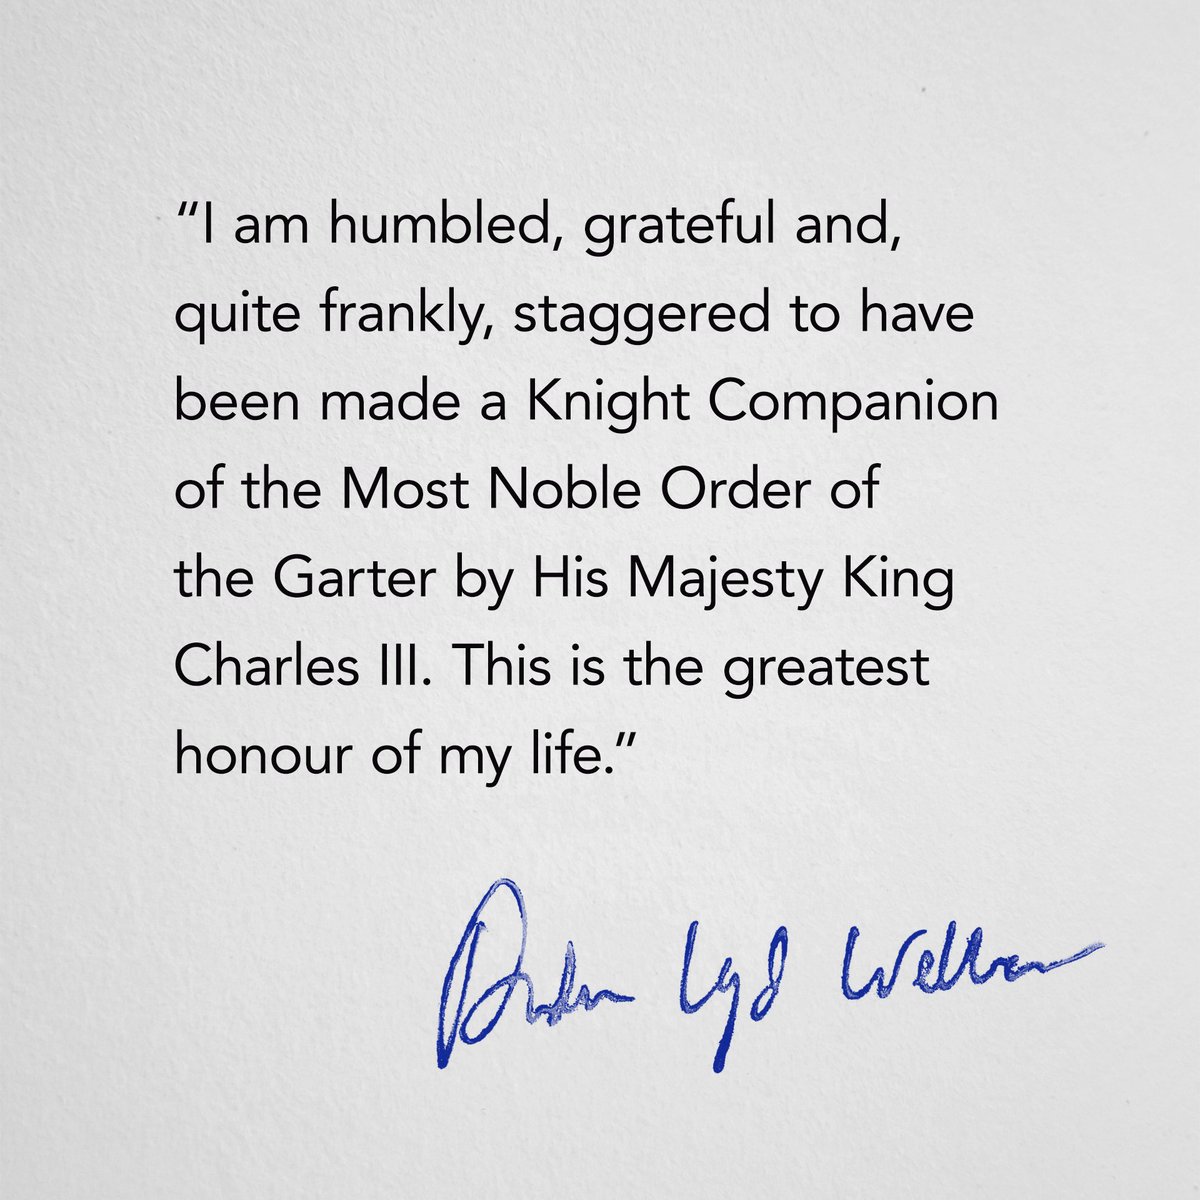 A note from ALW on being made a Knight Companion of the Most Noble Order of the Garter.